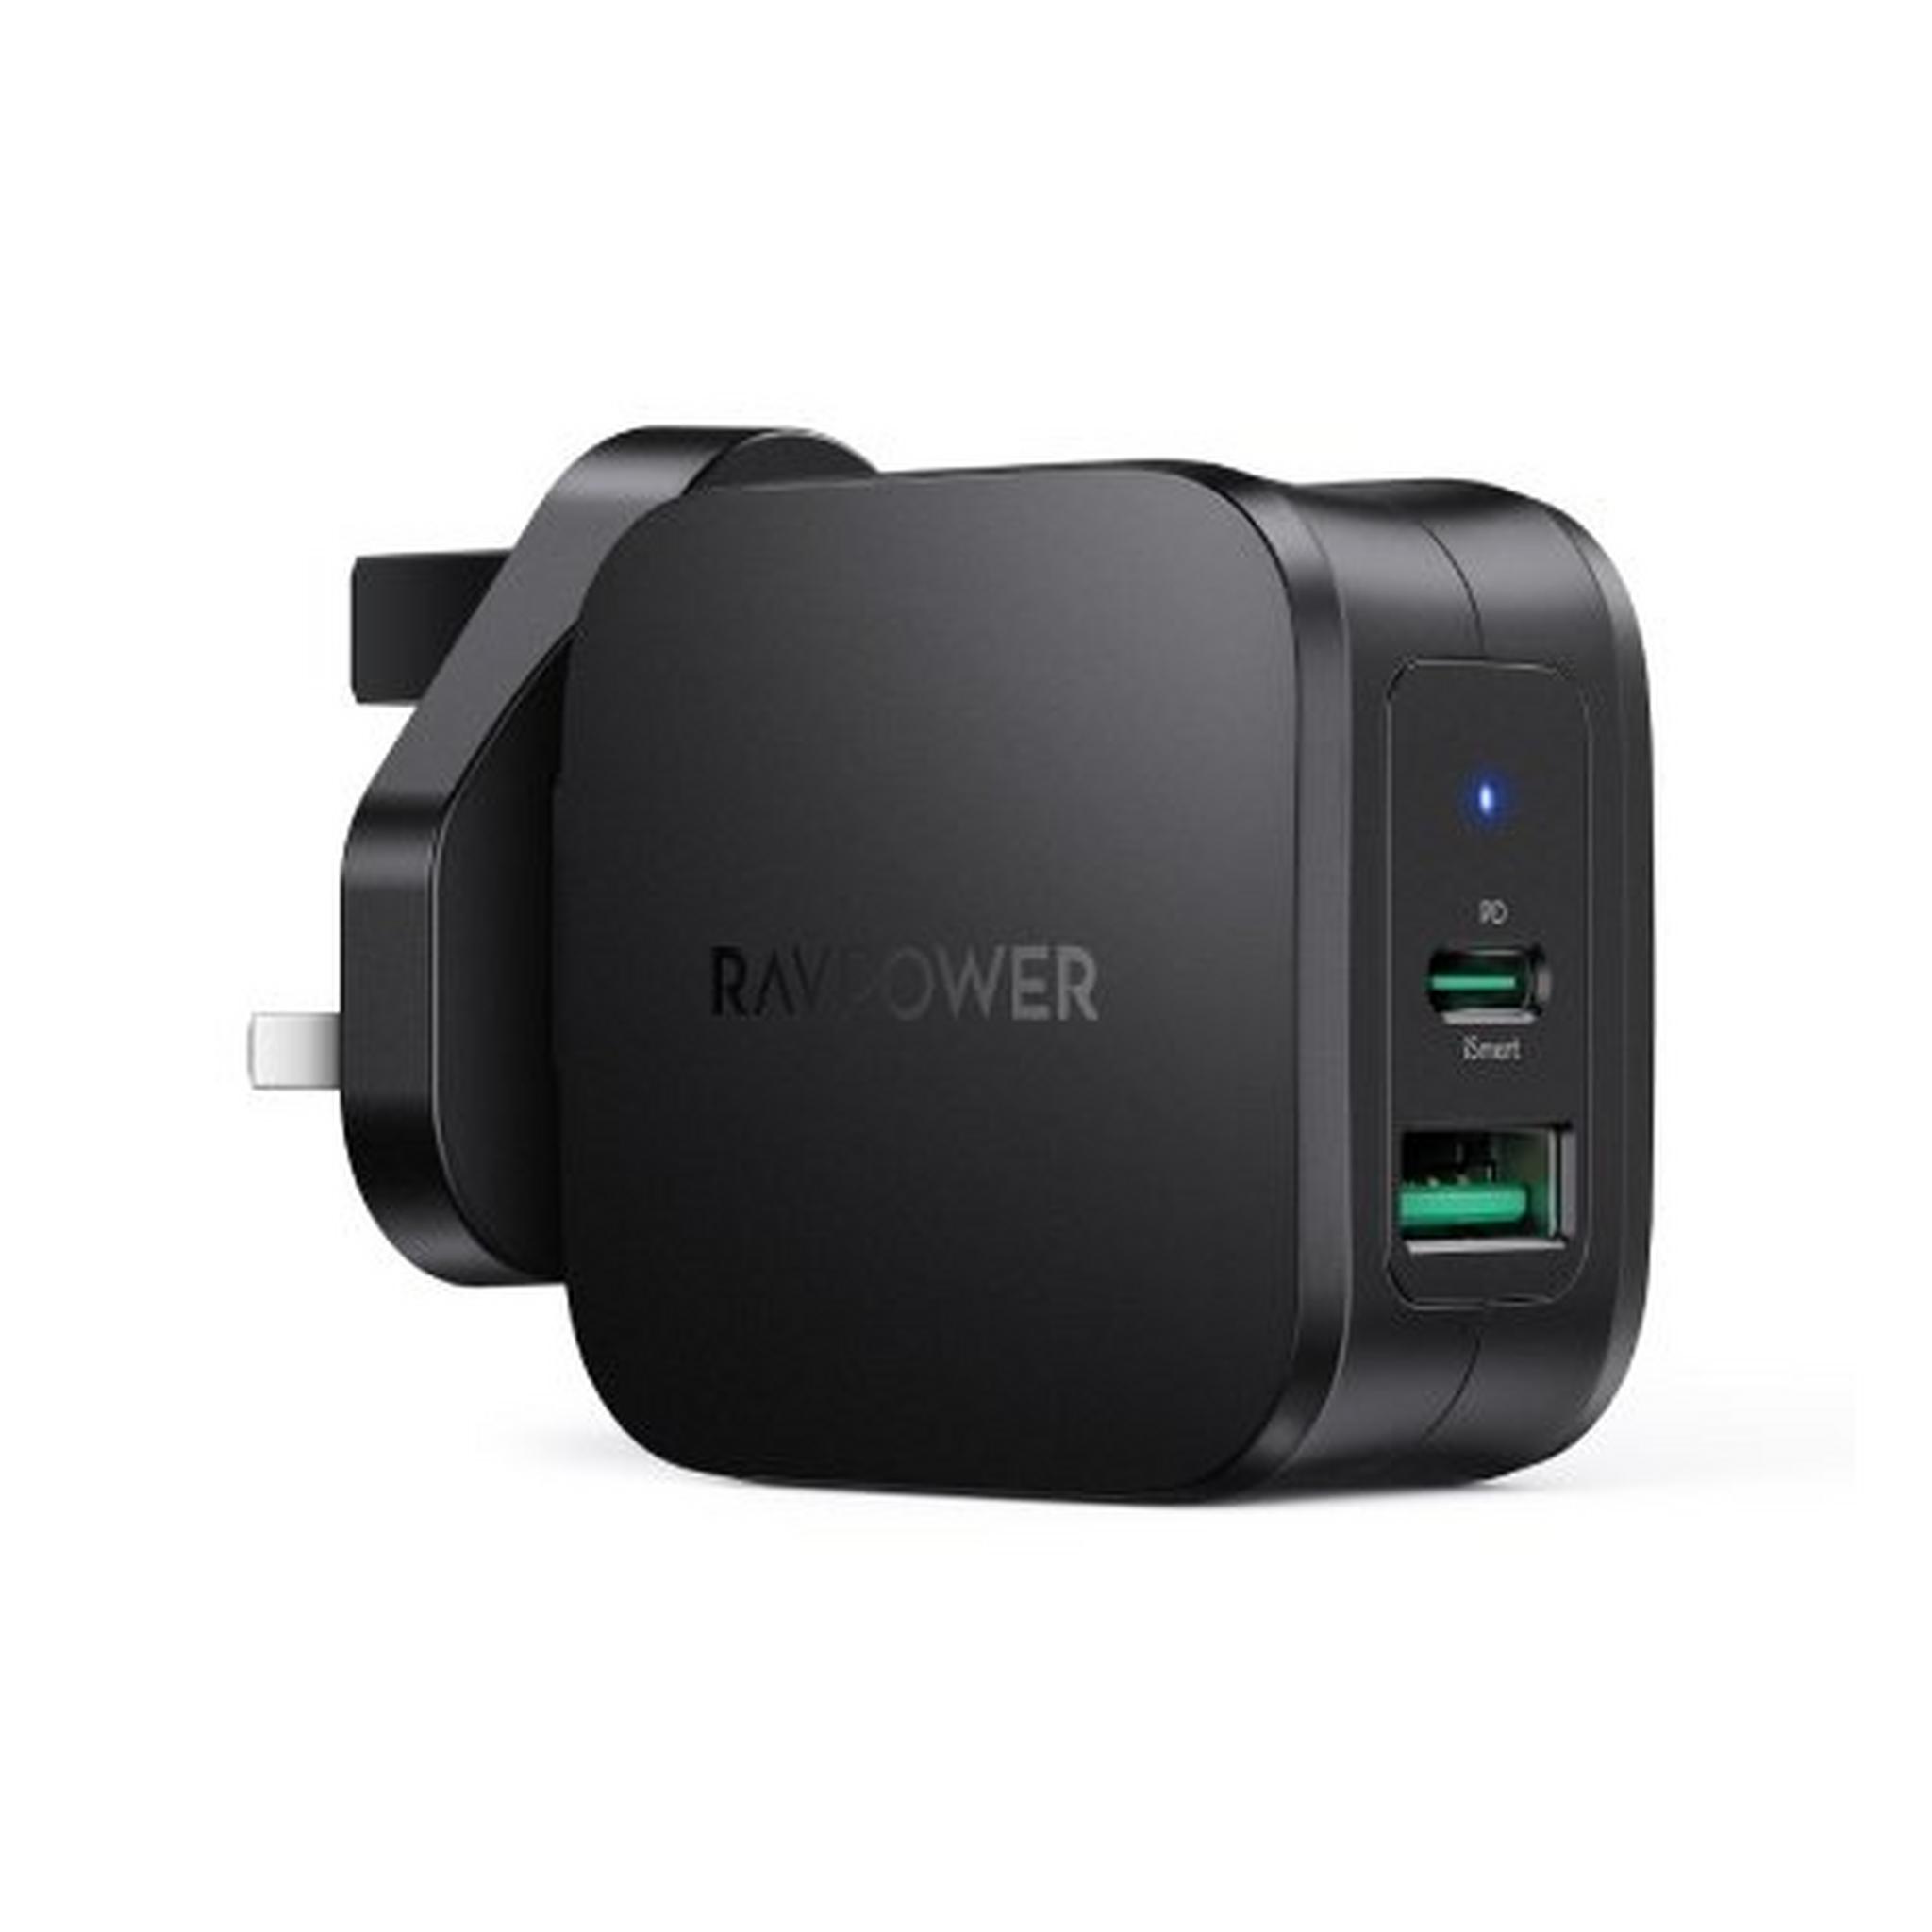 RAVPower PD Pioneer 30W 2-Port Wall Charger UK (RP-PC144) - Black